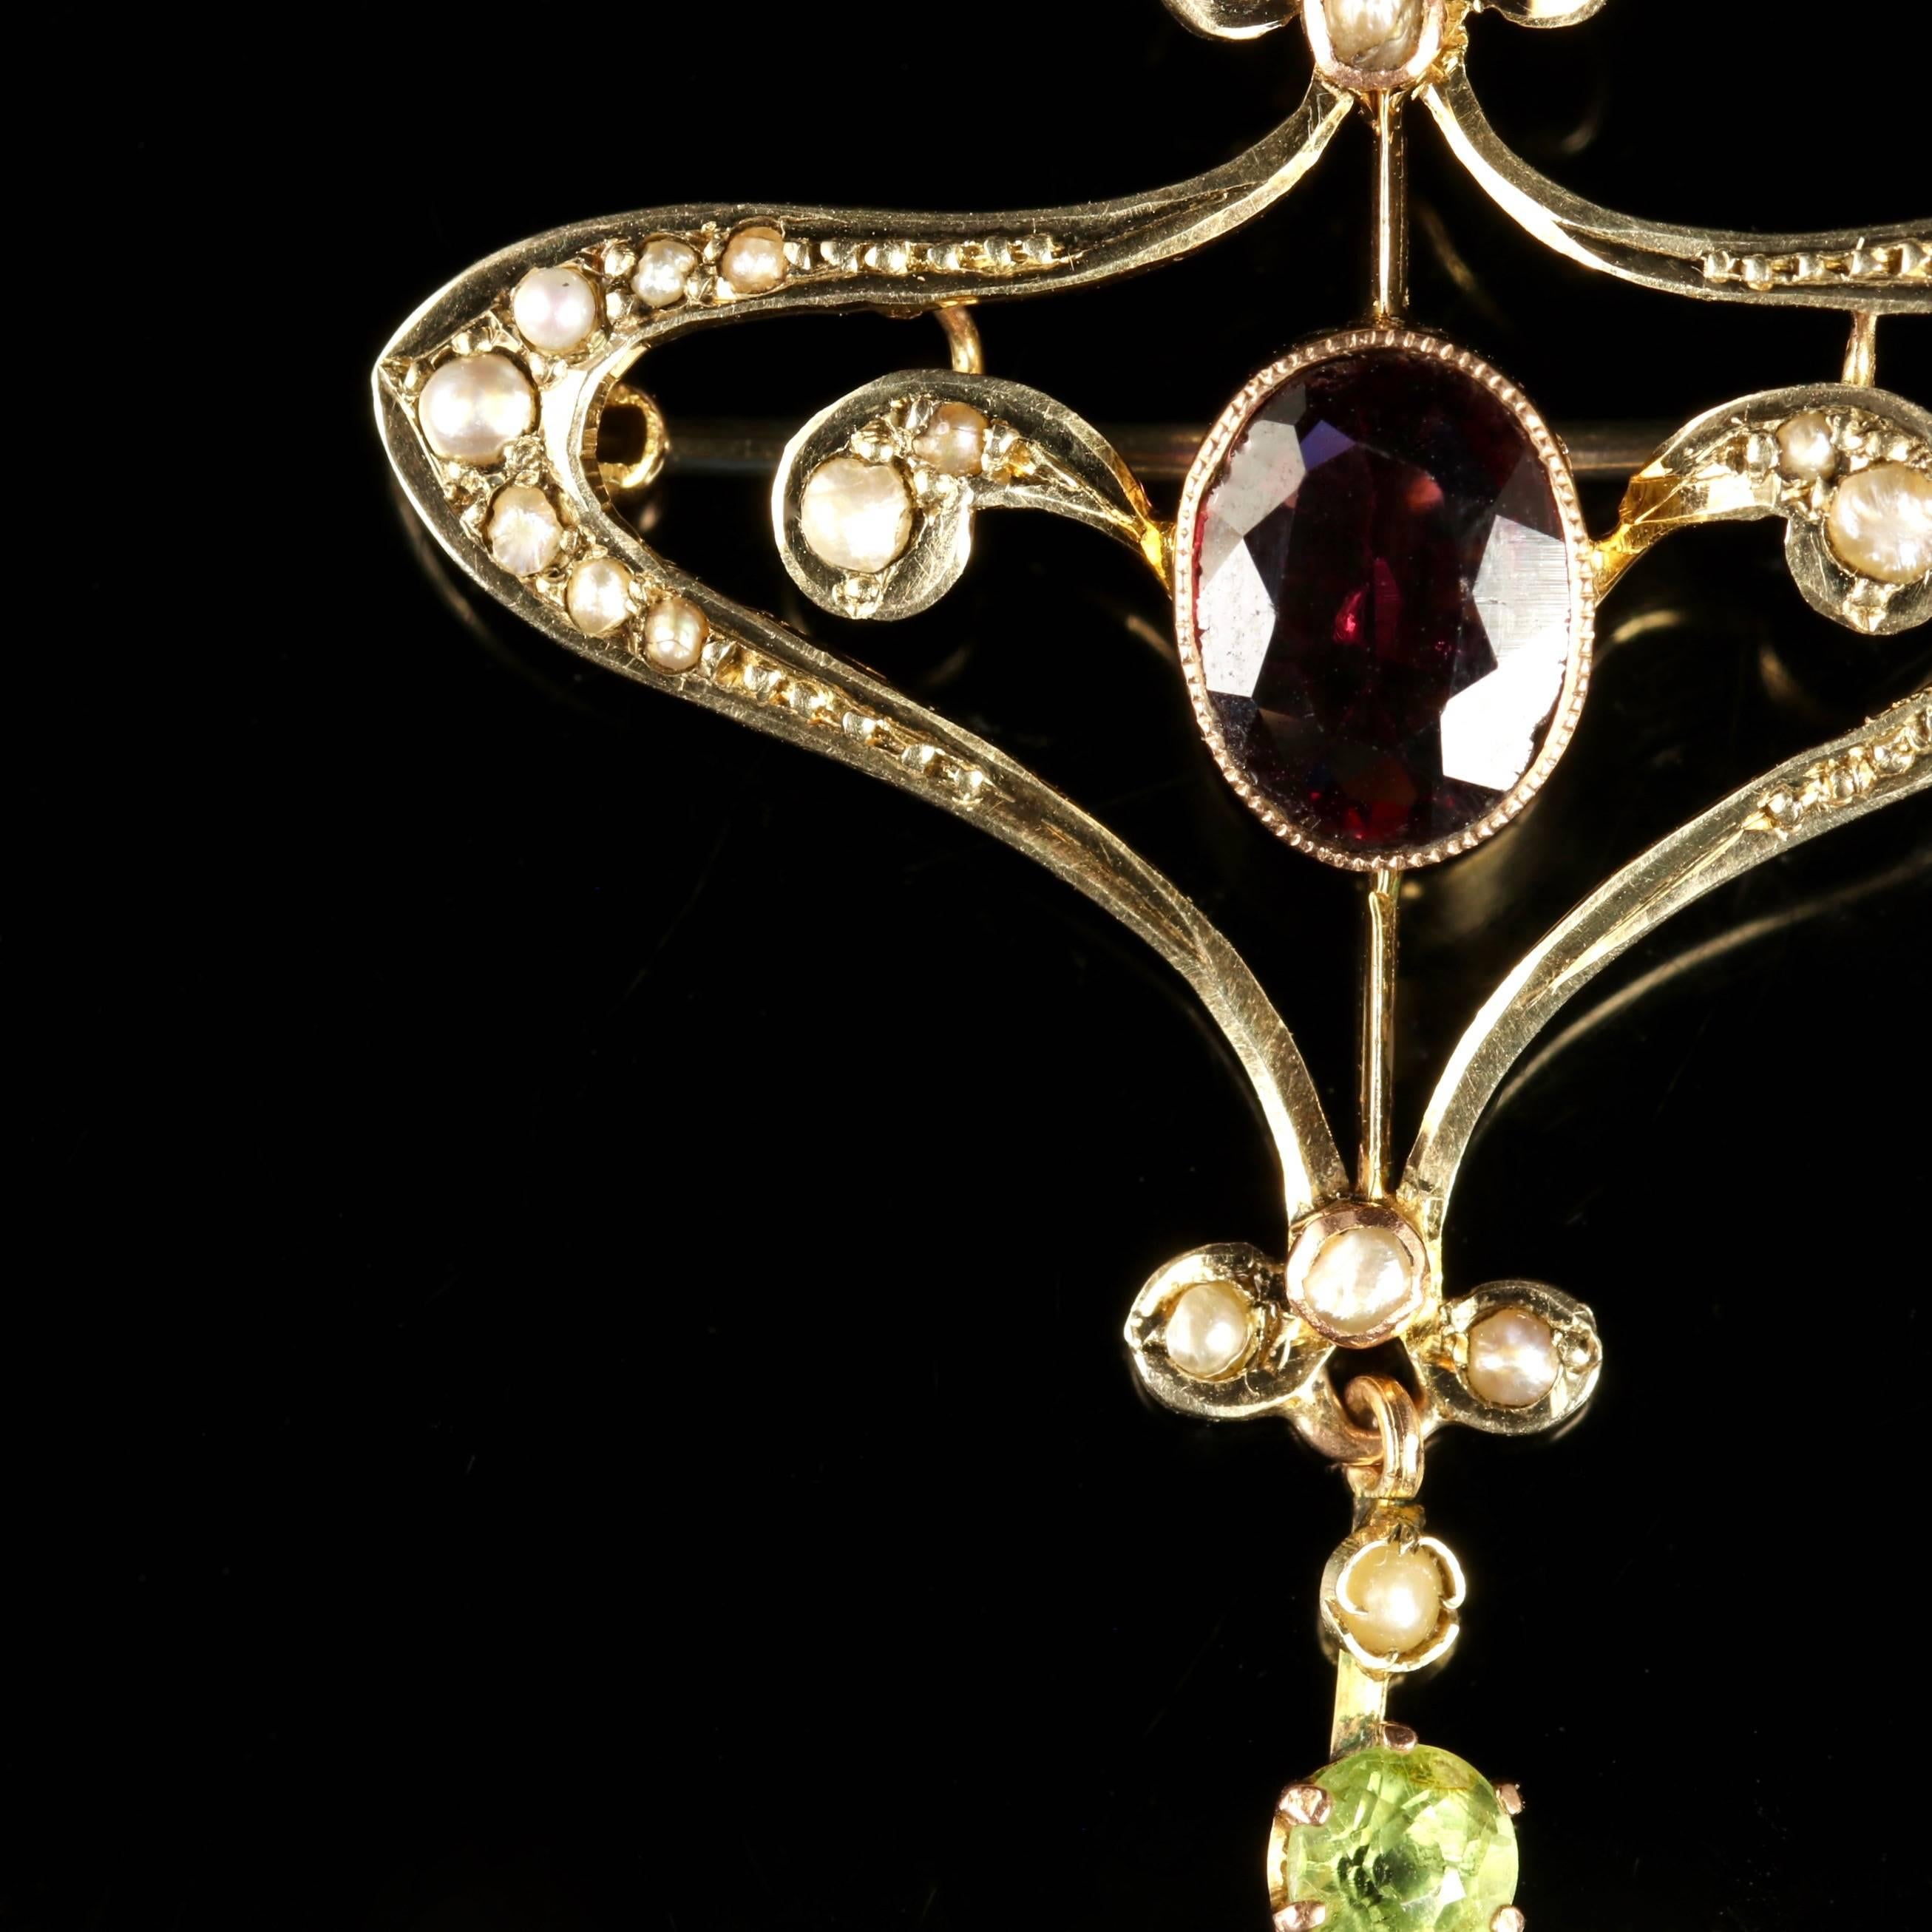 This beautiful antique 9ct Yellow Gold Suffragette Brooch Pendant is Victorian, Circa 1900.

Emmeline Pankhurst was the leader of the British Suffragette movement in the 19th century and through her efforts won the right for women to